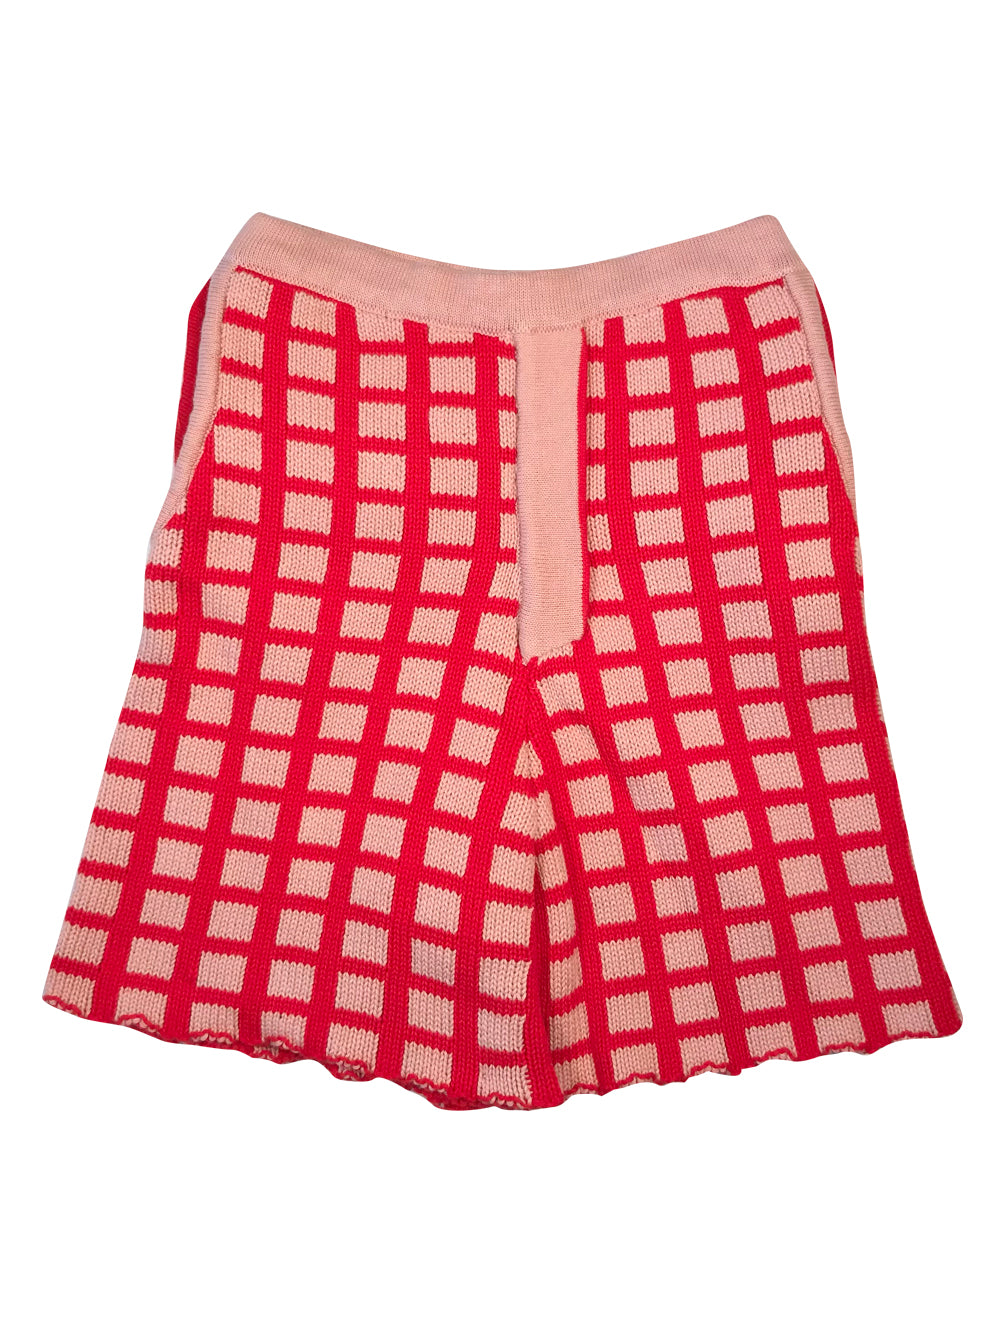 Pink and Red Knit Shorts